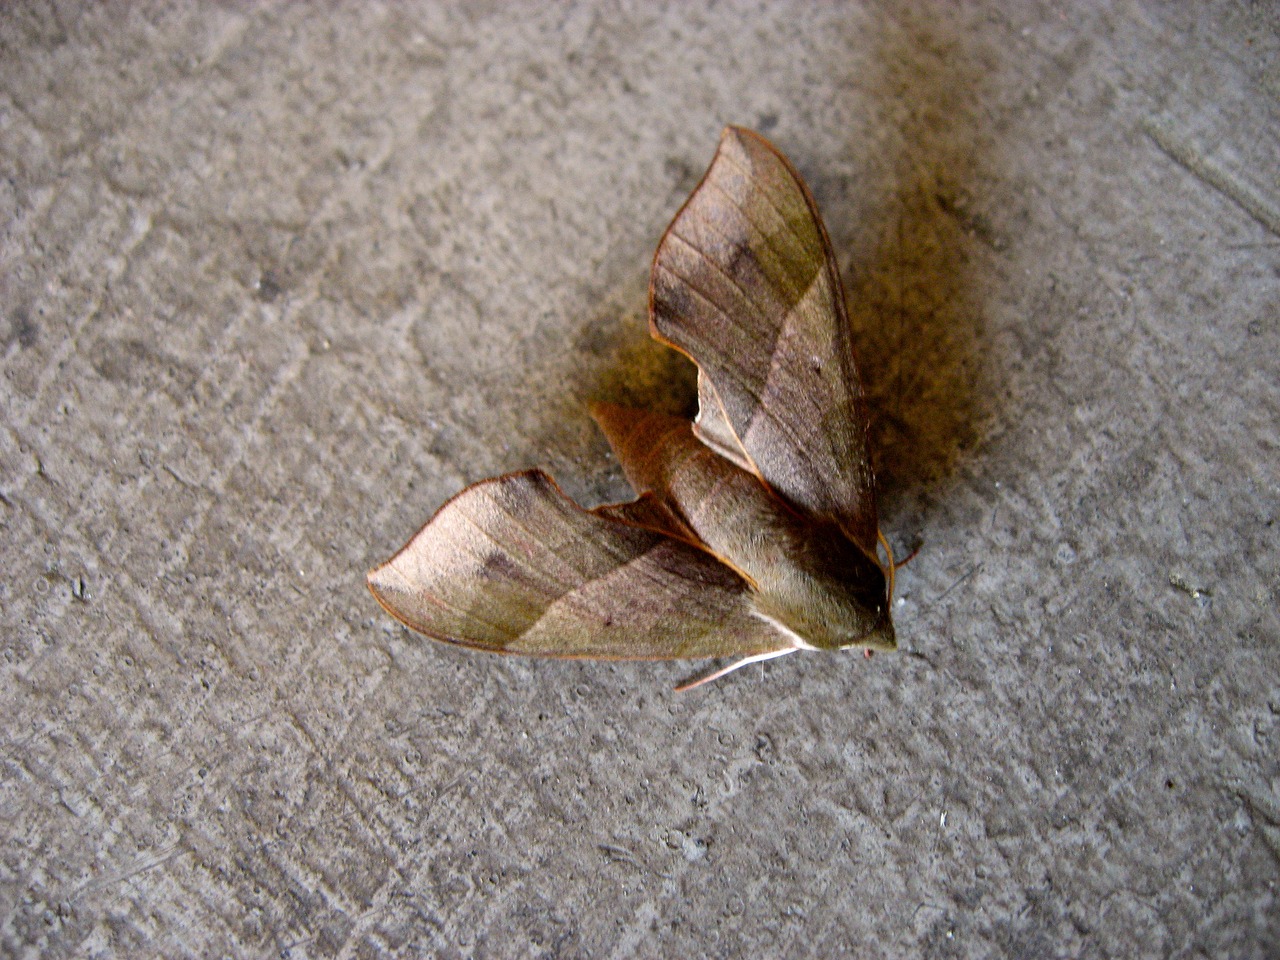 Virginia Creeper Sphinx Moth (Darapsa myron) on the stairs outside my apartment.